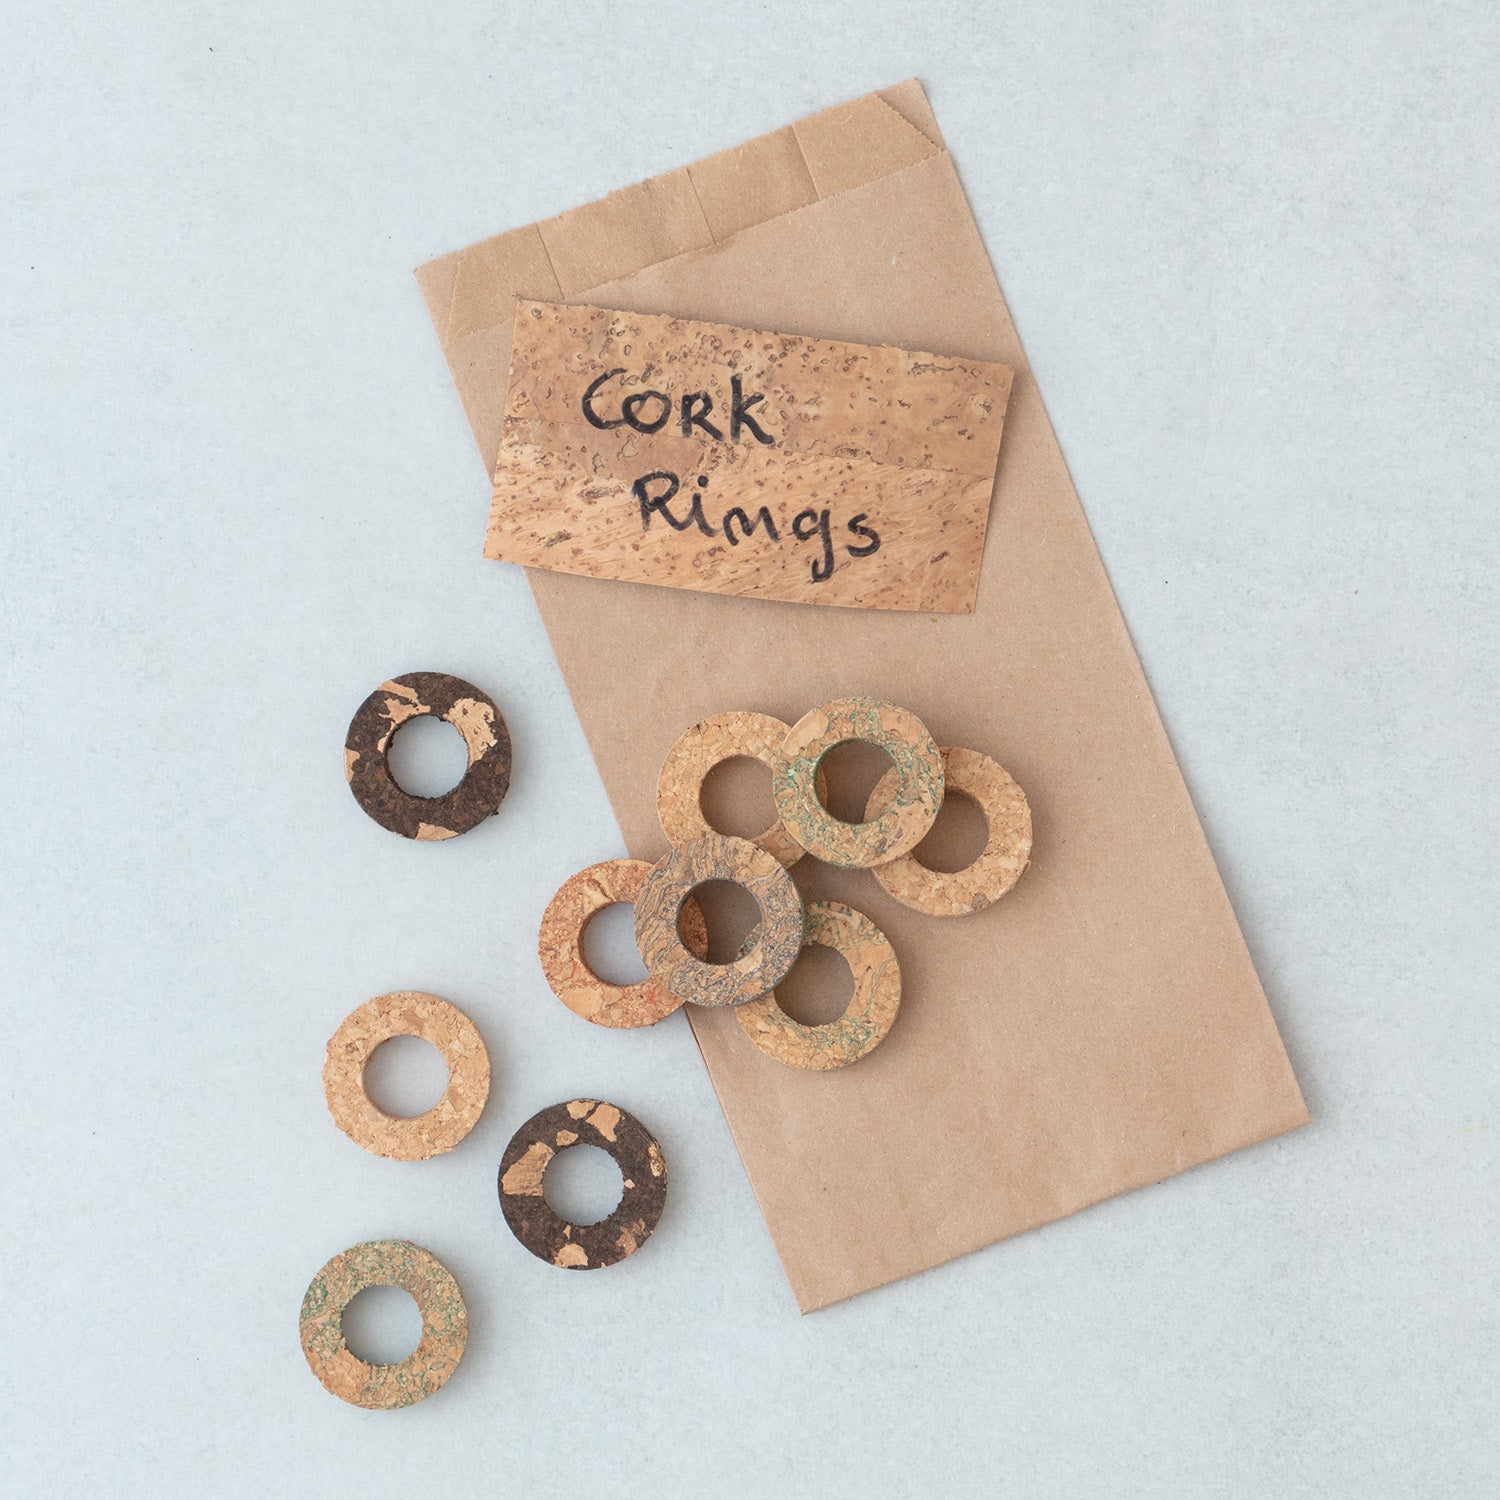 Colored and natural cork rings